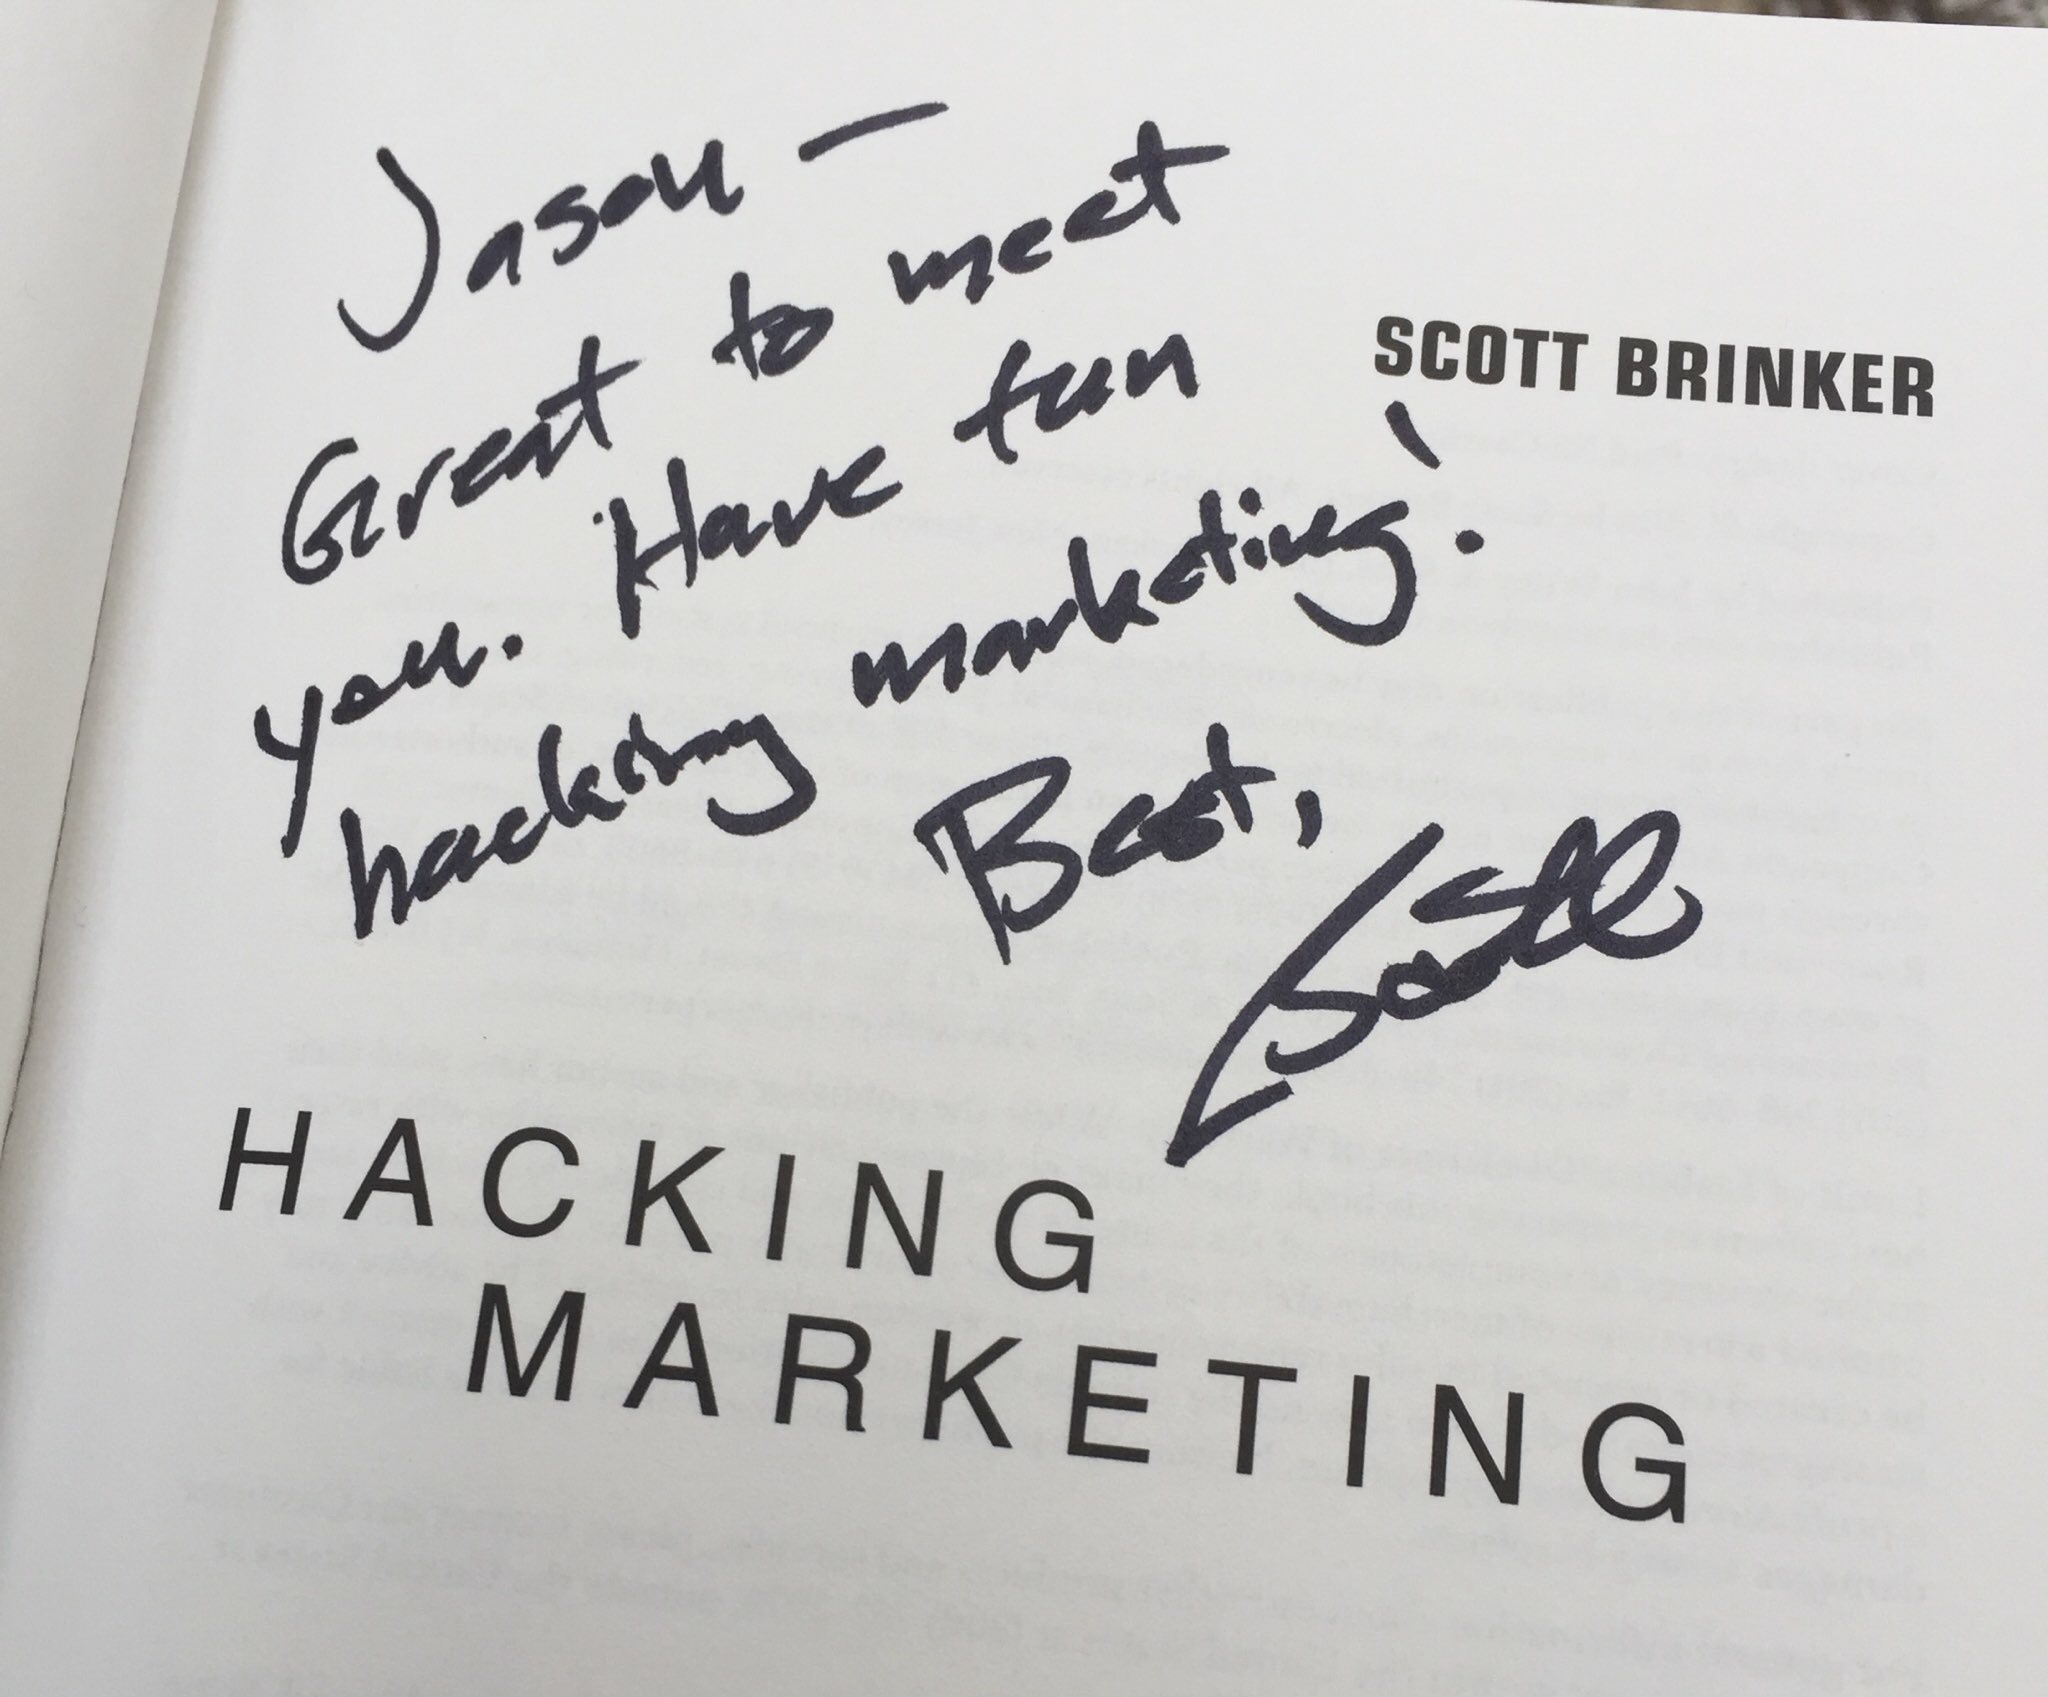 Signed book from one of my marketing technology sources of inspiration: Scott Brinker.